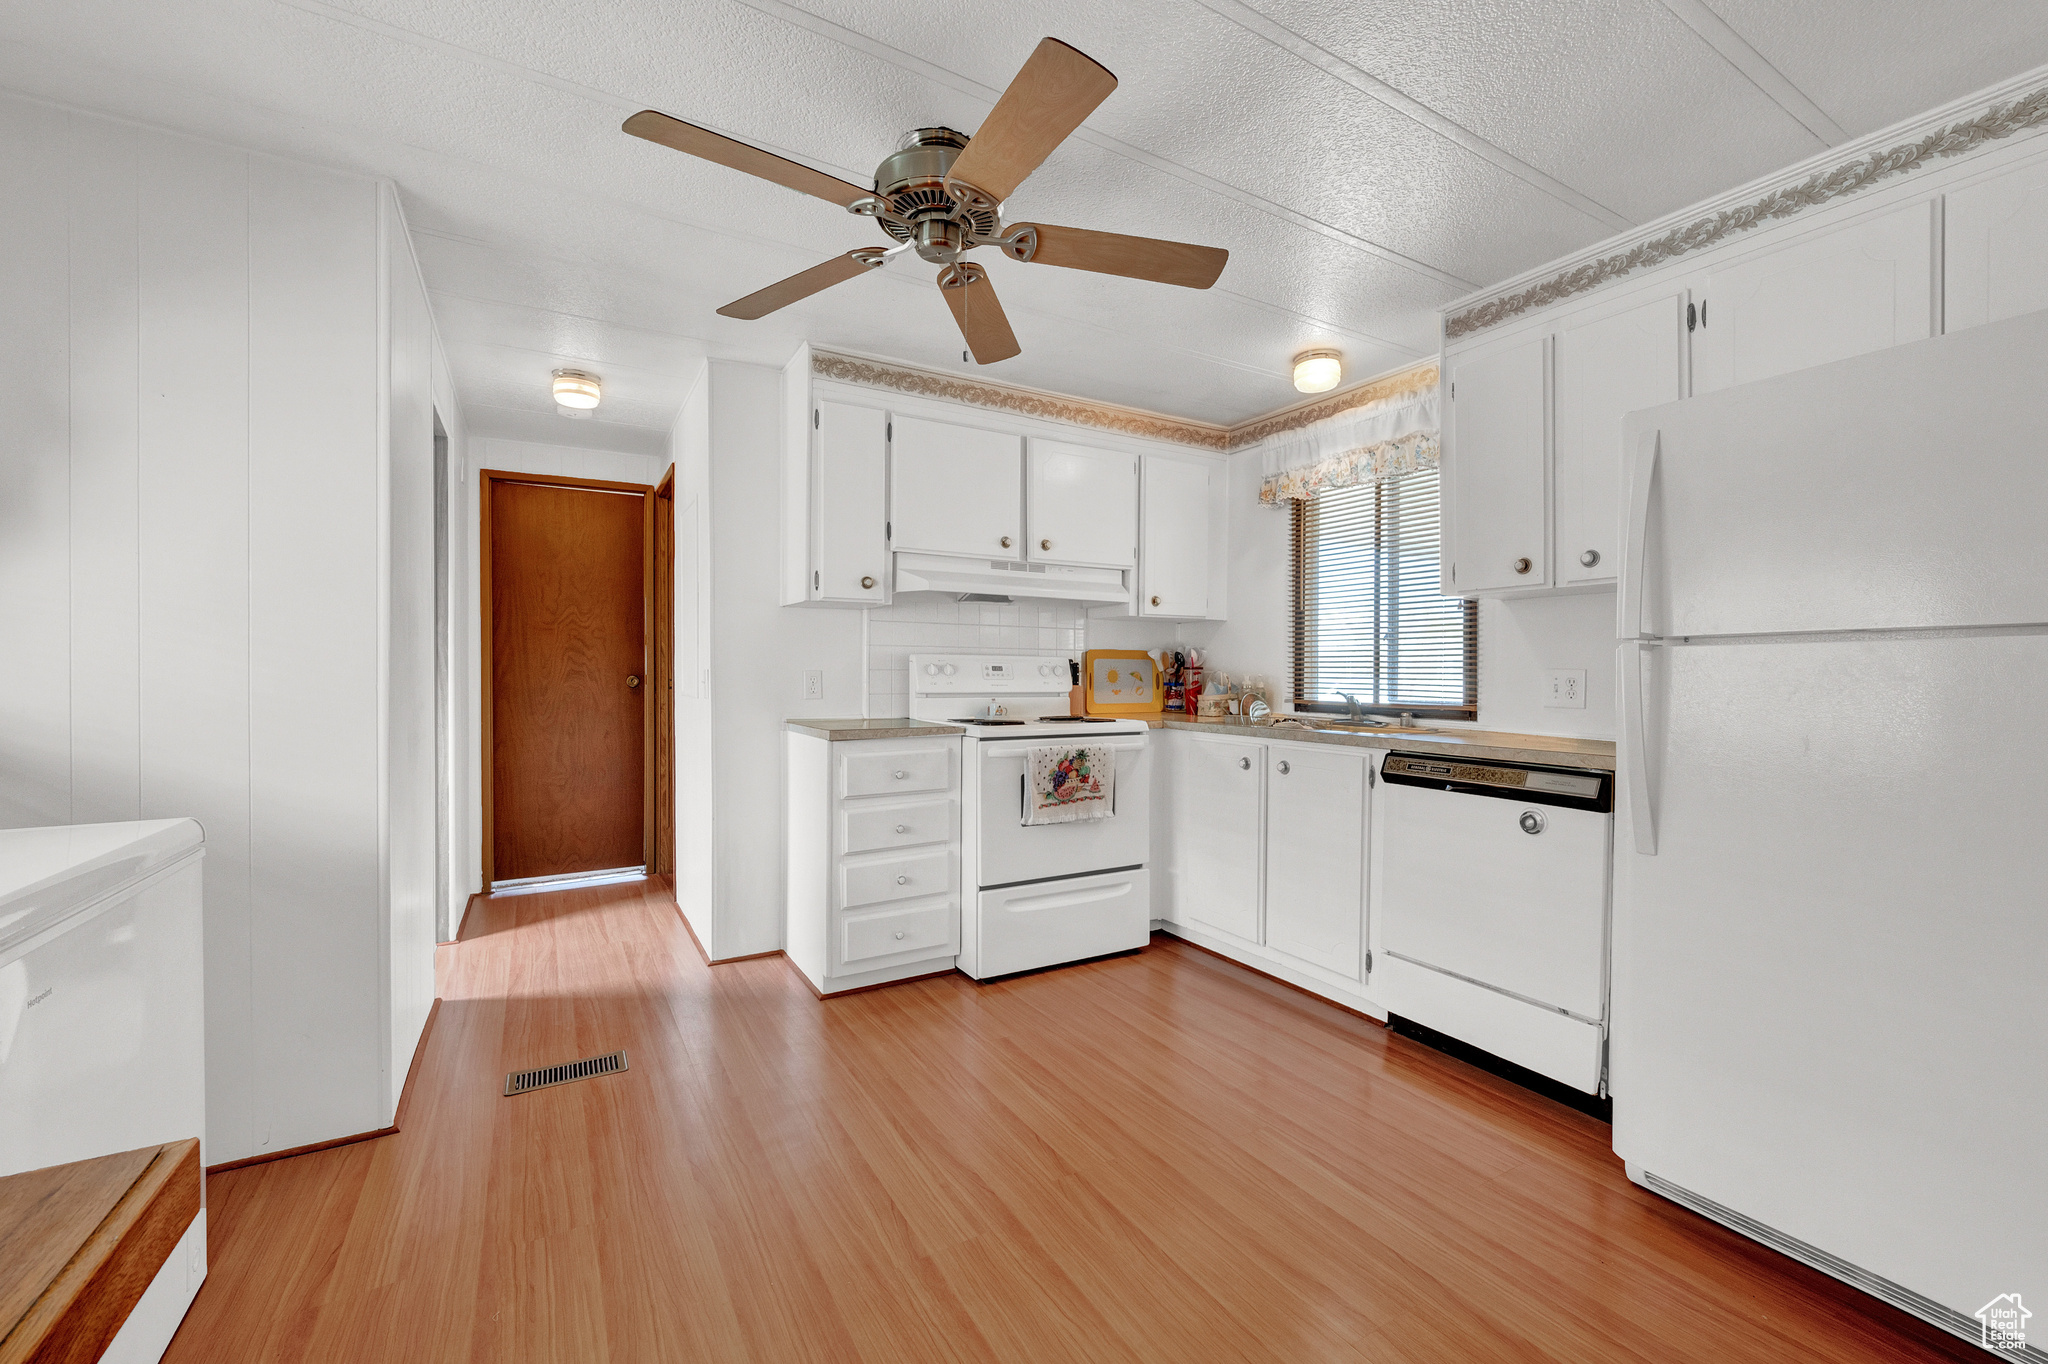 Kitchen featuring white appliances, light wood-type flooring, white cabinetry, ceiling fan, and a textured ceiling